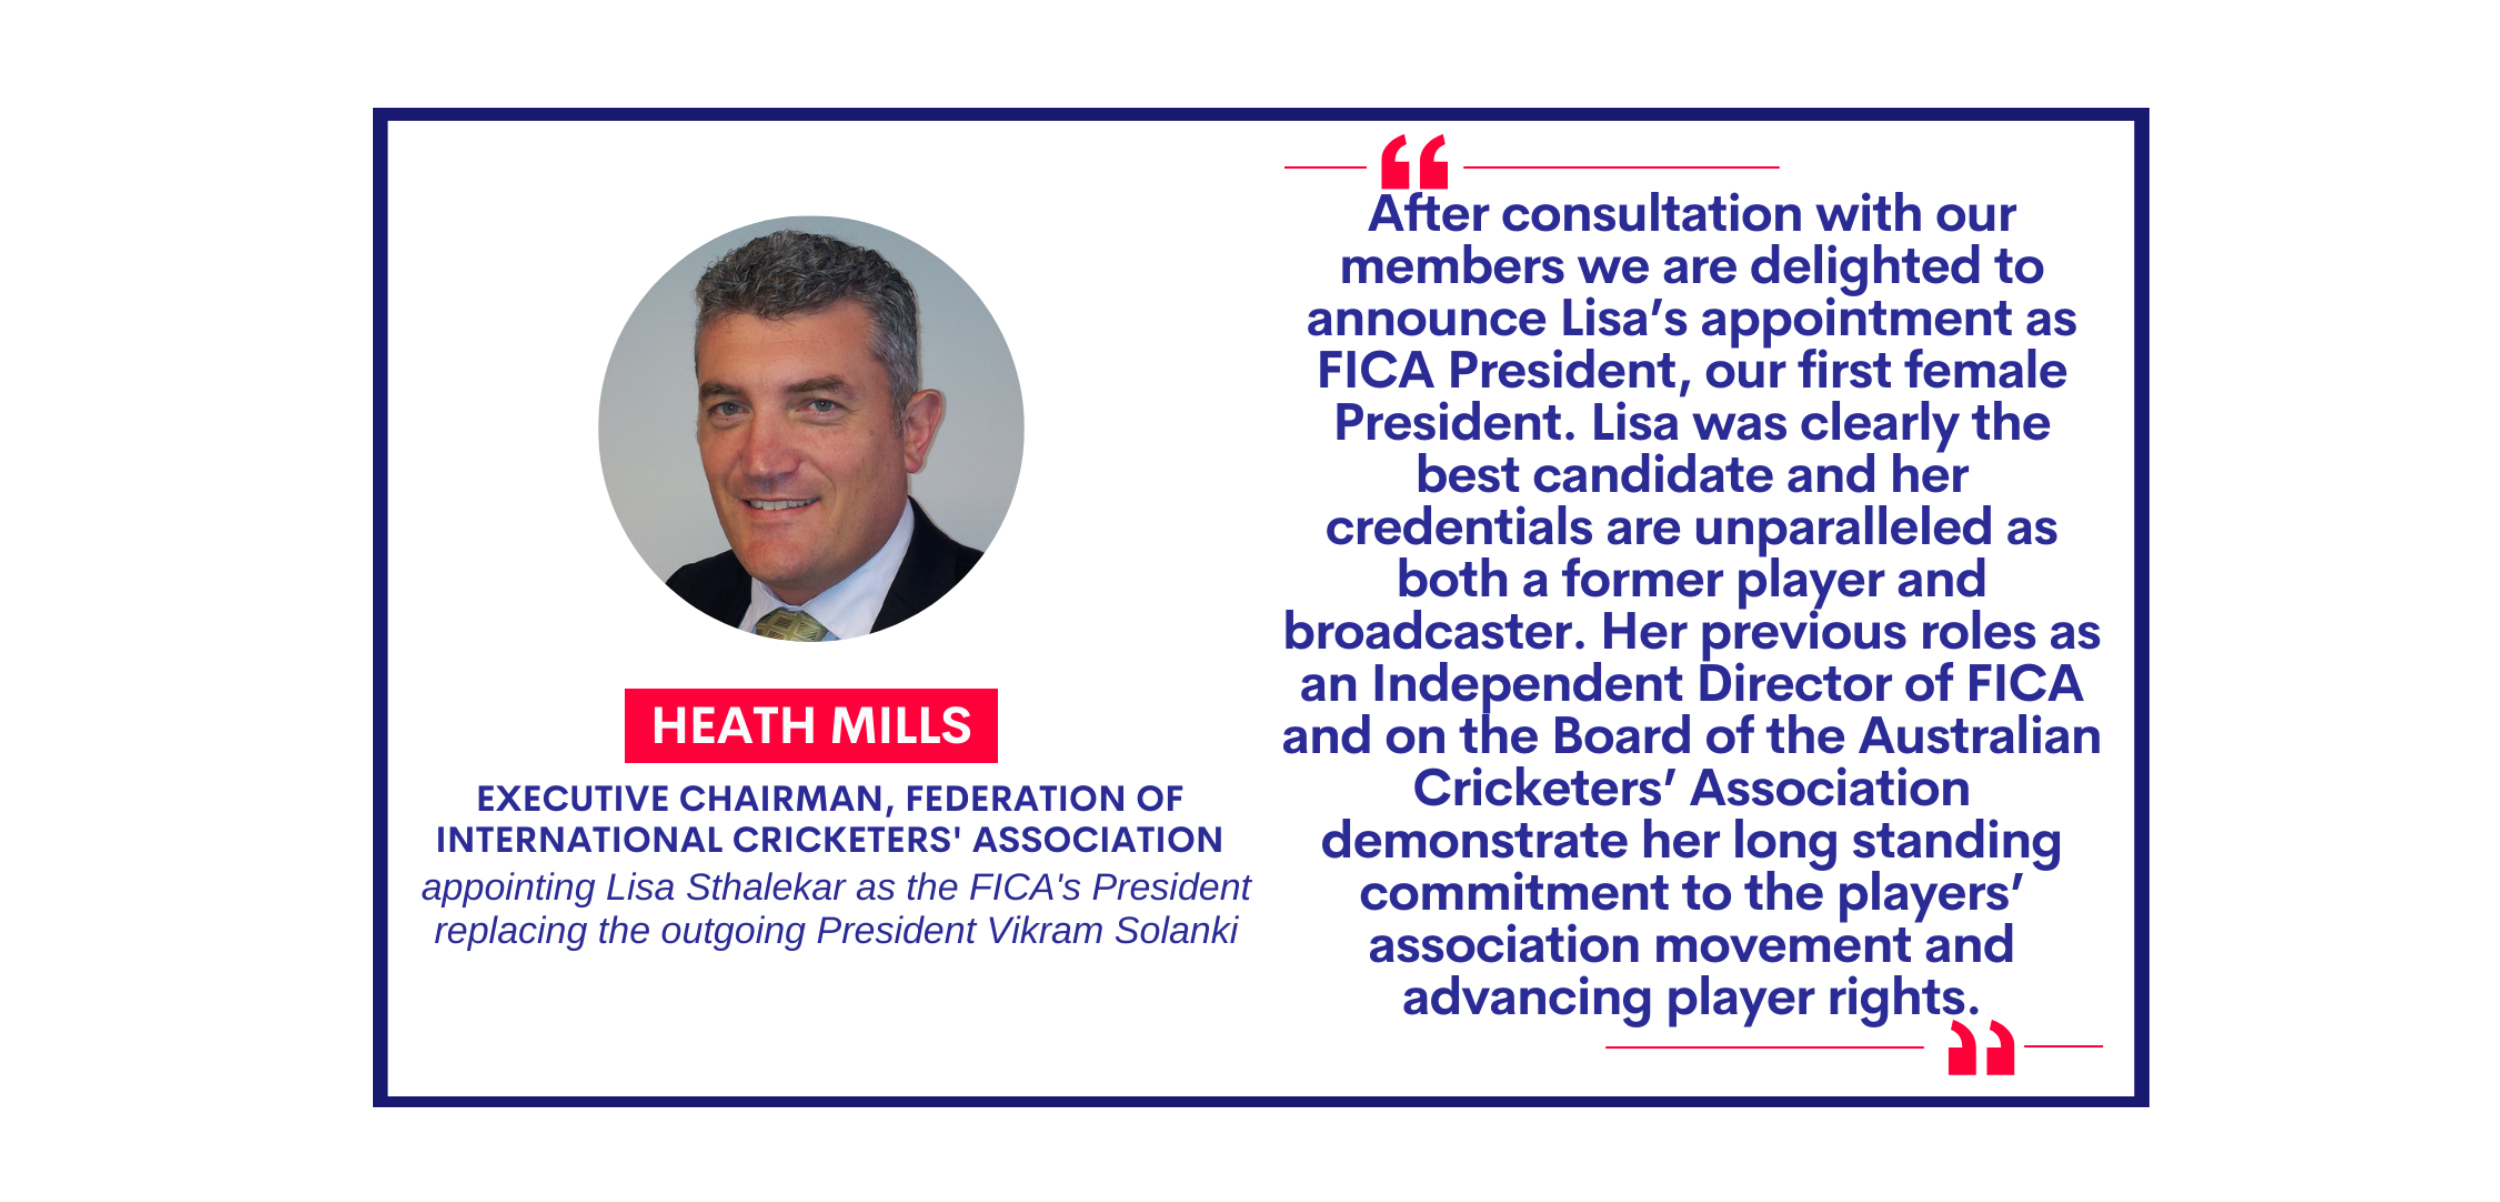 Heath Mills, Executive Chairman, Federation of International Cricketers' Association appointing Lisa Sthalekar as the FICA's President replacing the outgoing President Vikram Solanki